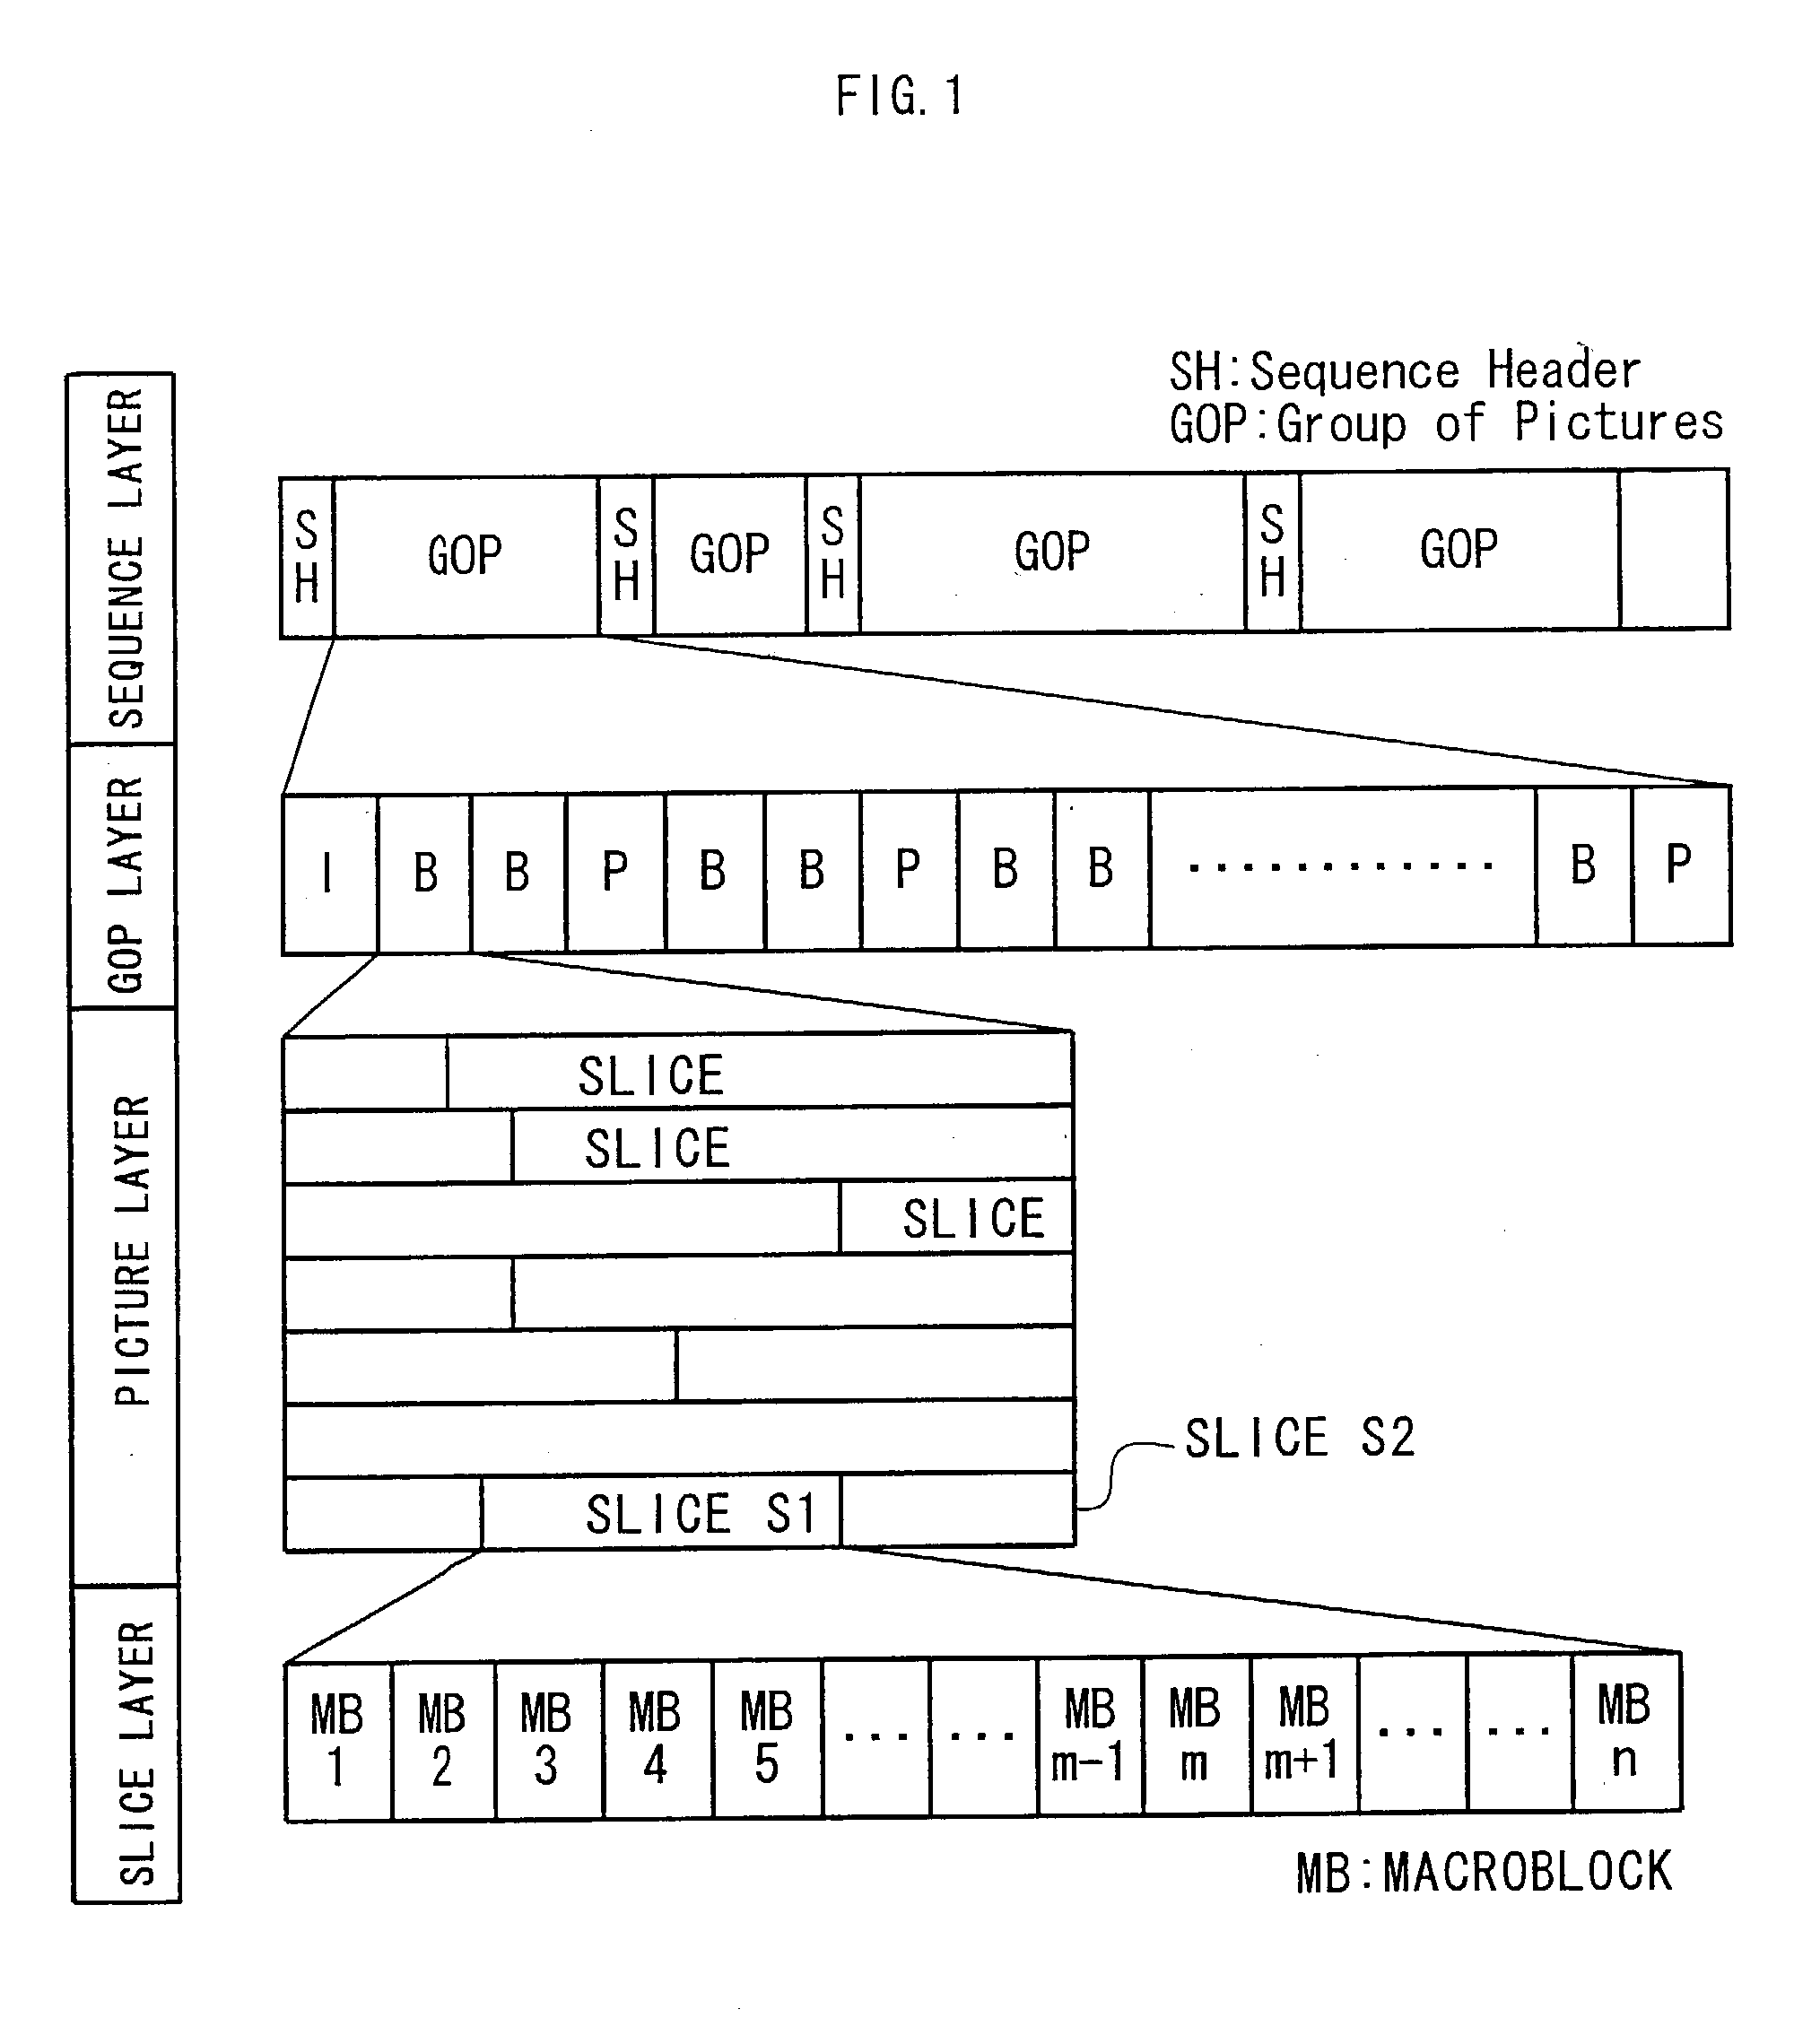 Image reproducing method, and image processing method, and image reproducing device, image processing device, and television receiver capable of using the methods